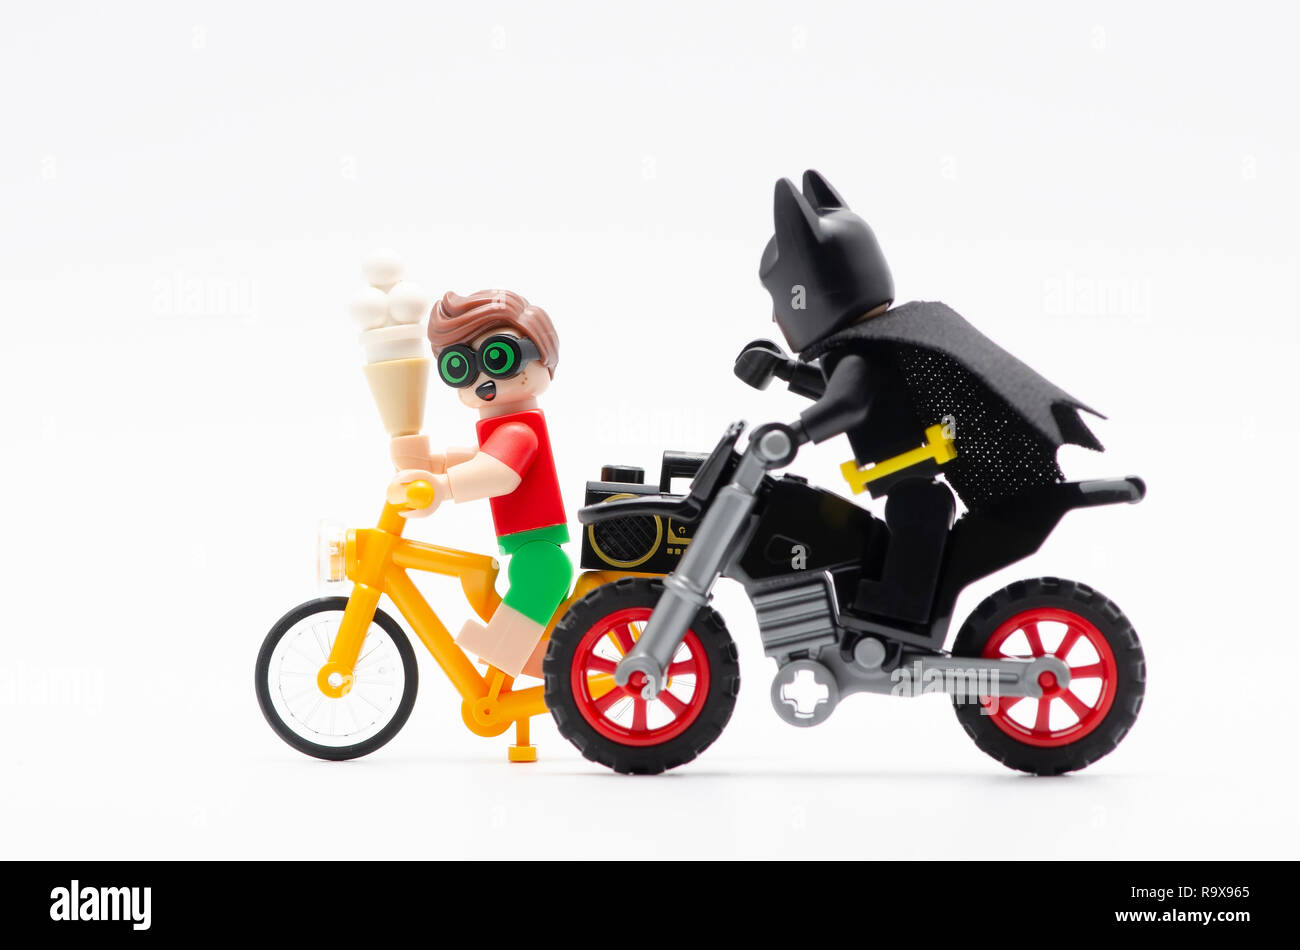 lego batman with robin riding bicycle with radio at his back and holding a ice cream. Lego minifigures are manufactured by The Lego Group. Stock Photo